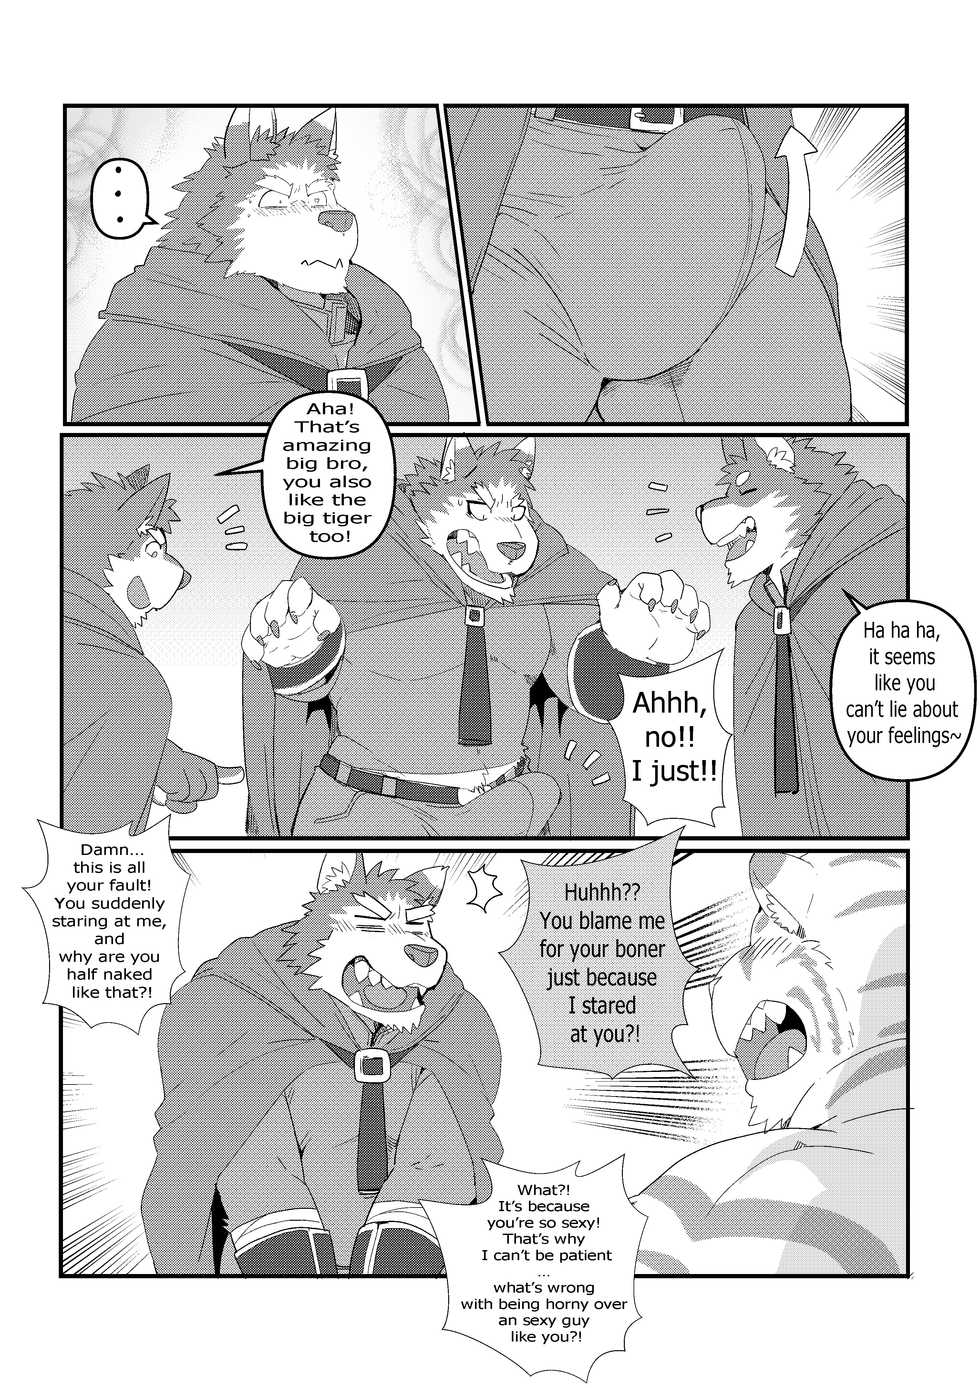 [LucusOLD] Our Boyfriend is a bulky tiger - Page 8